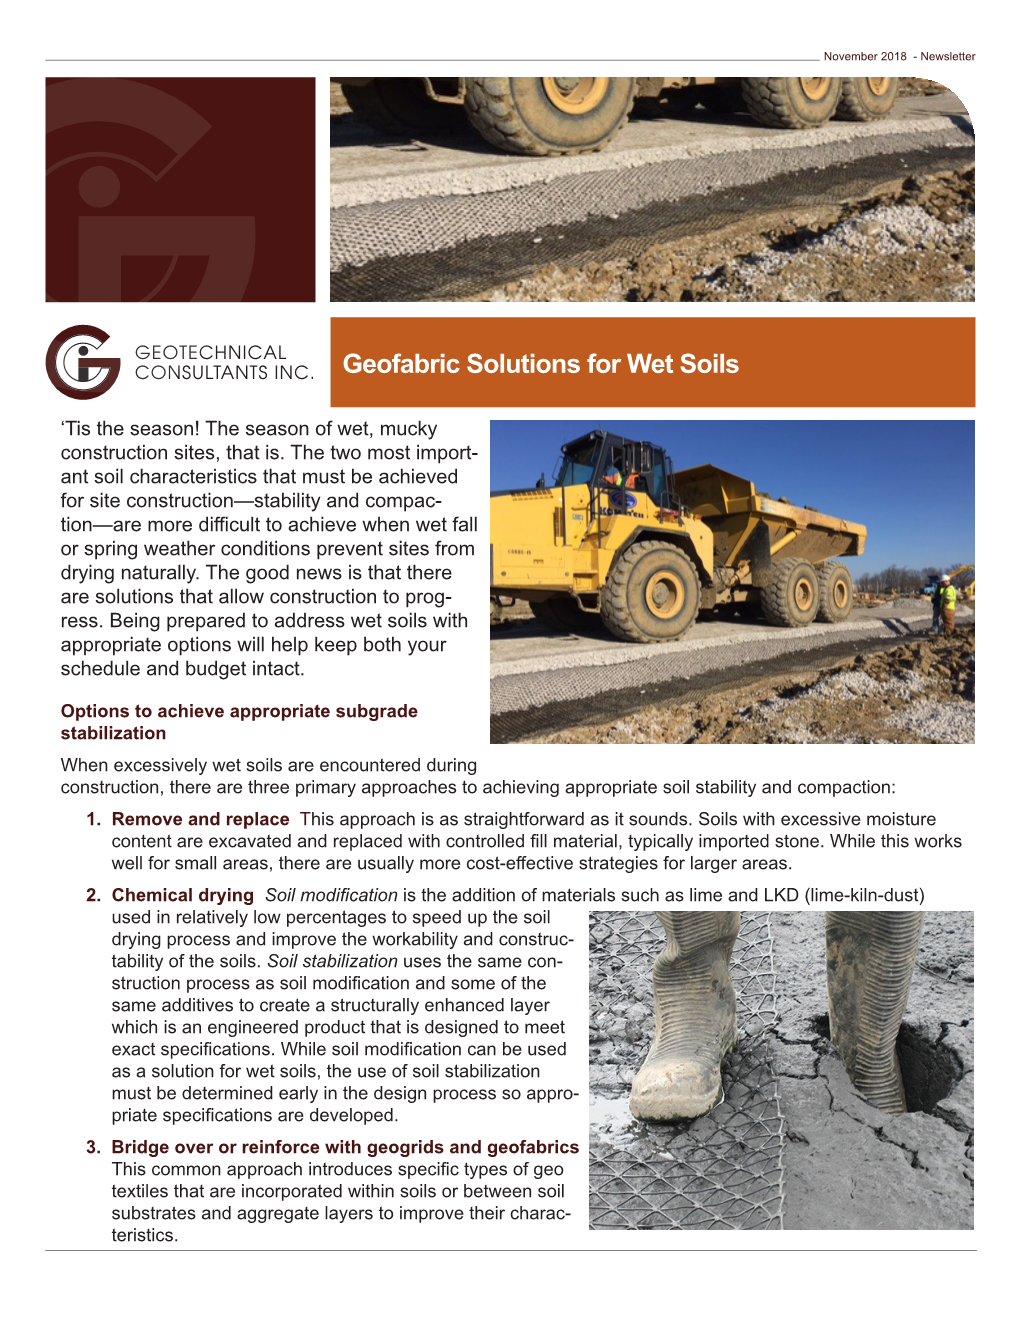 Geofabric Solutions for Wet Soils